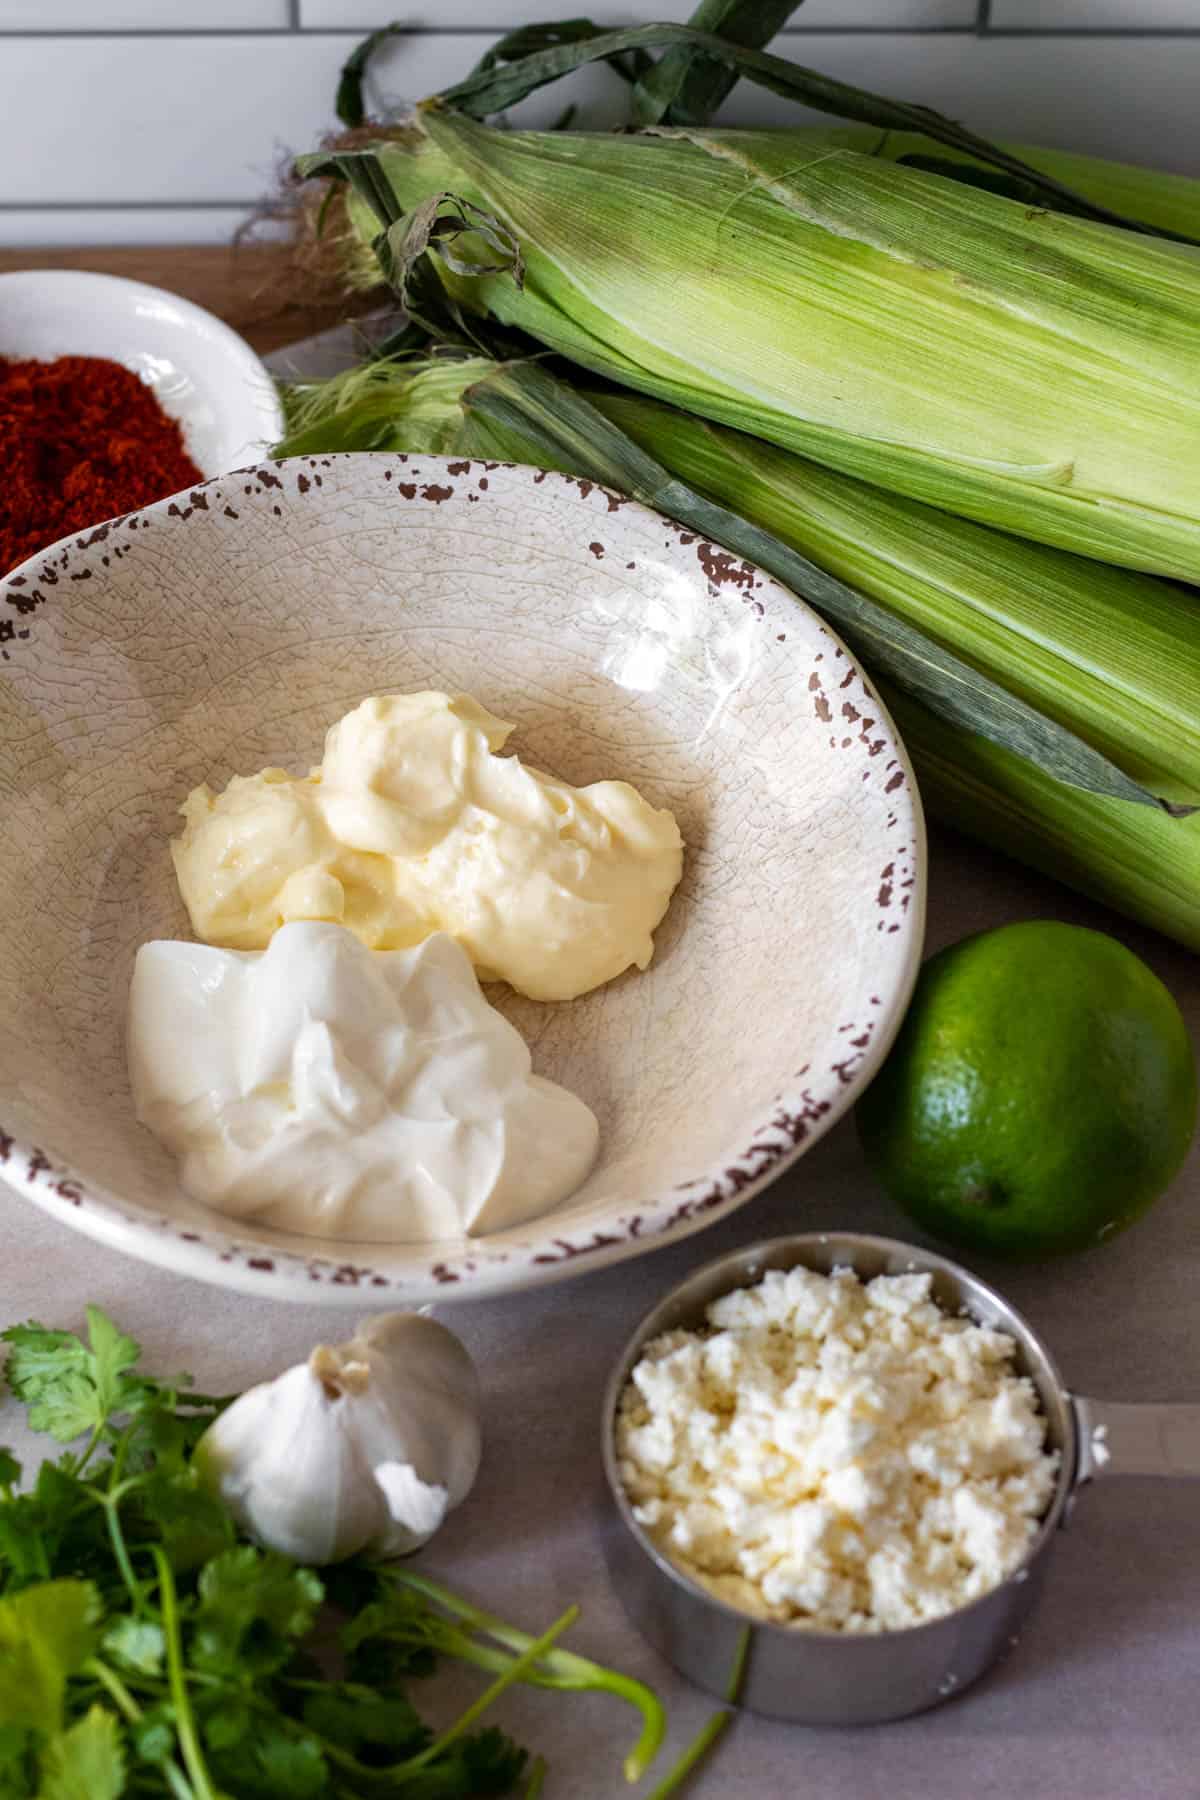 Ingredients for Mexican street corn.